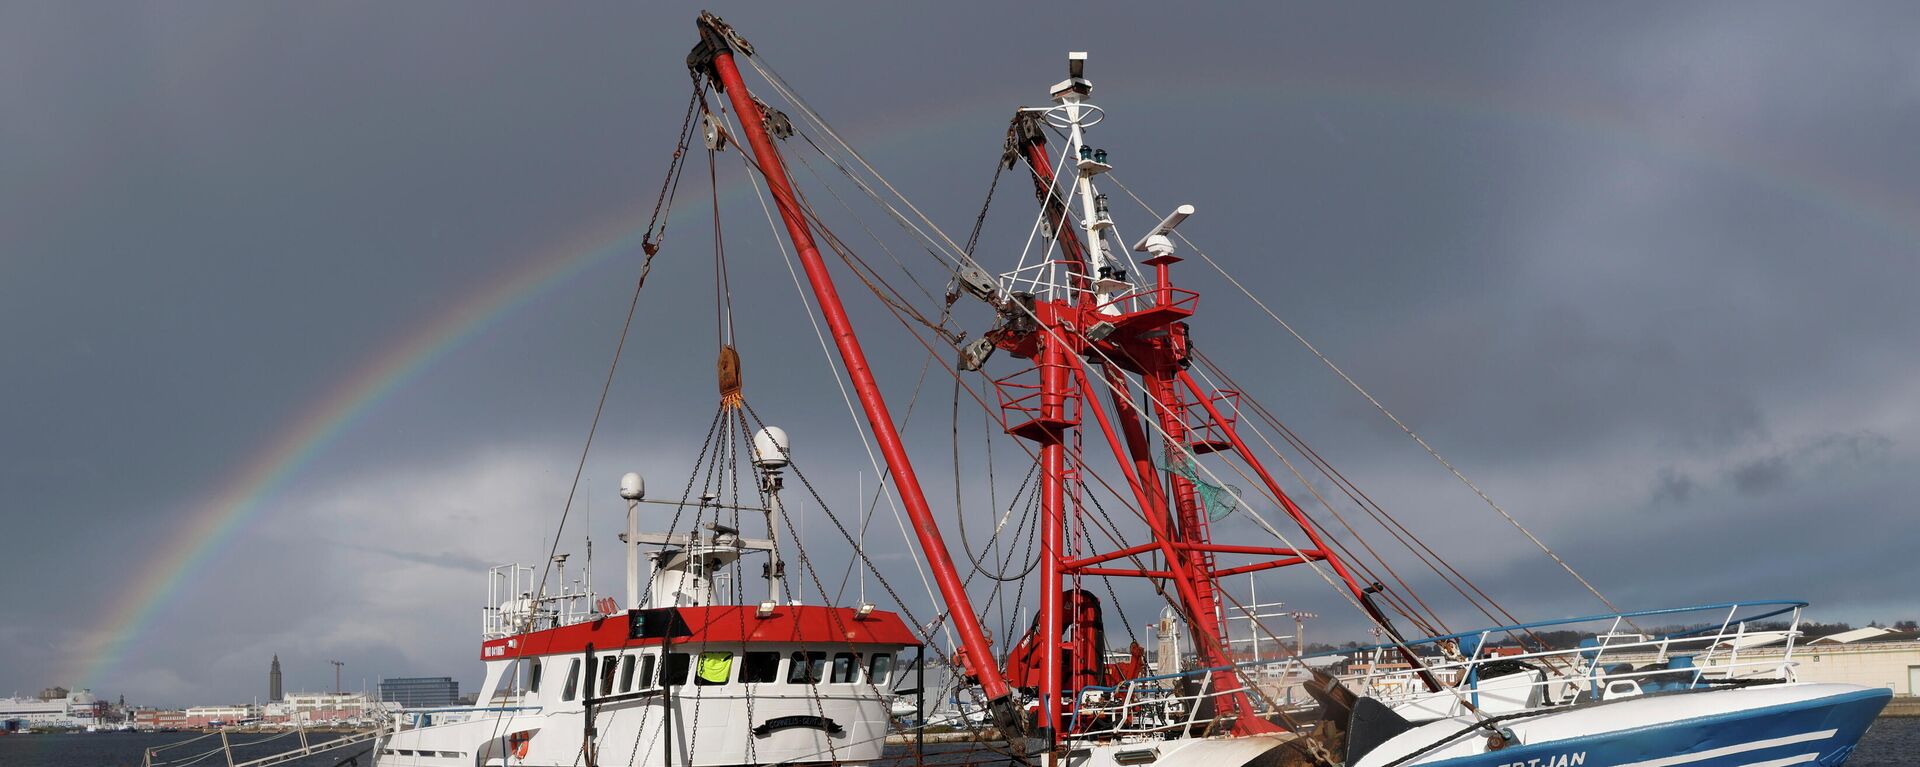 A rainbow appears as British trawler Cornelis Gert Jan is seen moored in the port of Le Havre, after being seized last week?fishing?in the French territorial waters without licence, in Le Havre, France, November 2, 2021 - Sputnik International, 1920, 04.11.2021